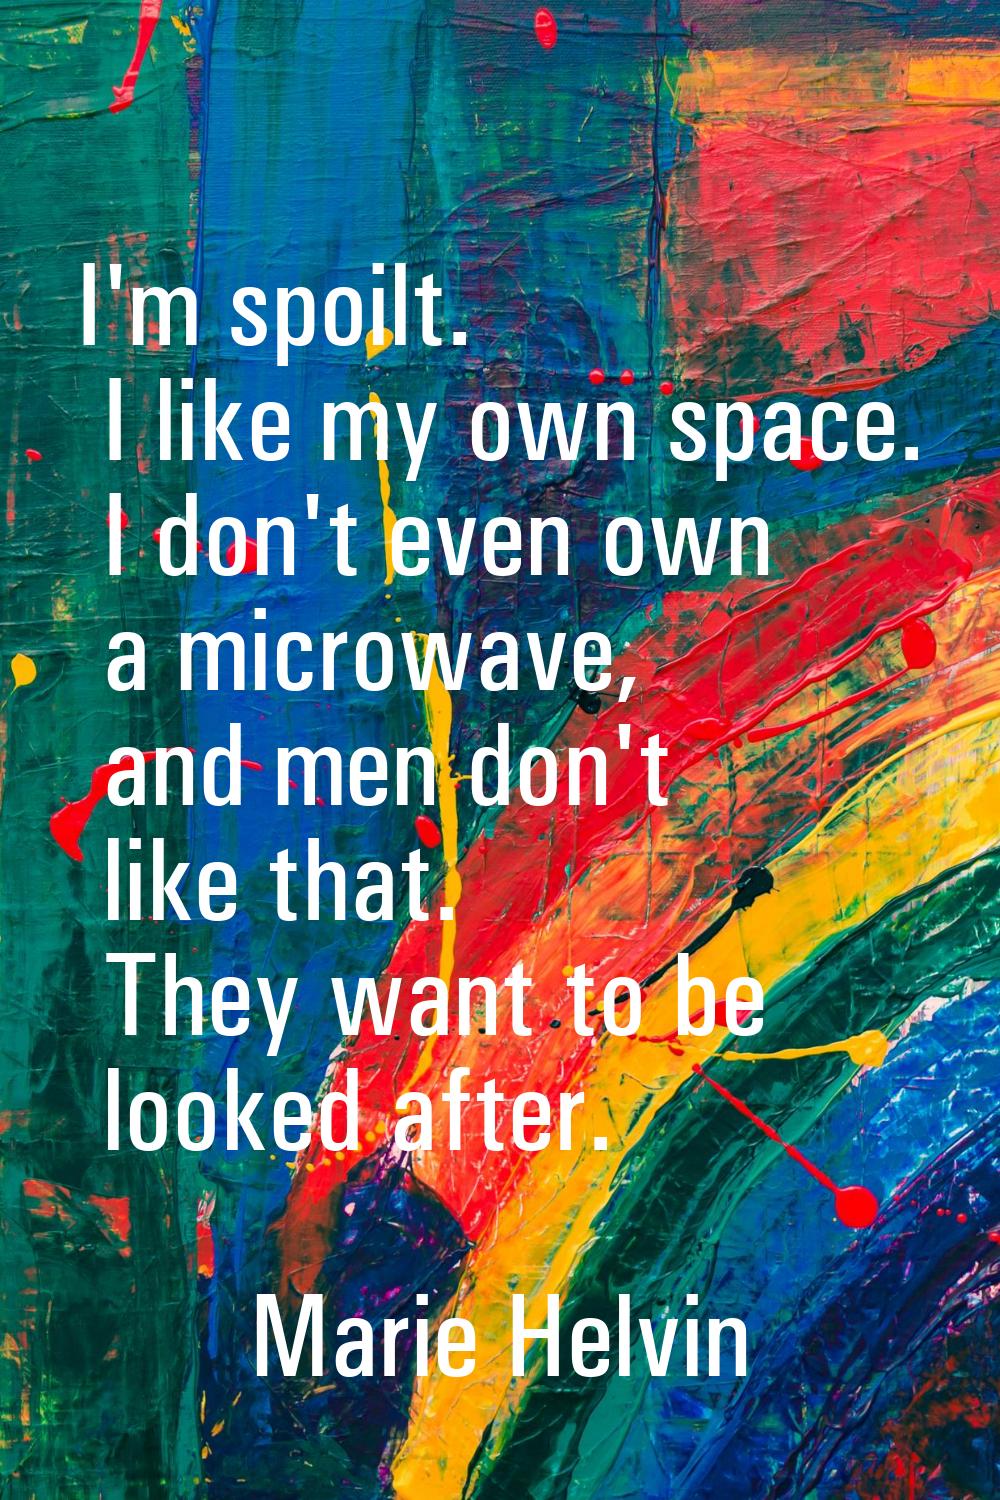 I'm spoilt. I like my own space. I don't even own a microwave, and men don't like that. They want t